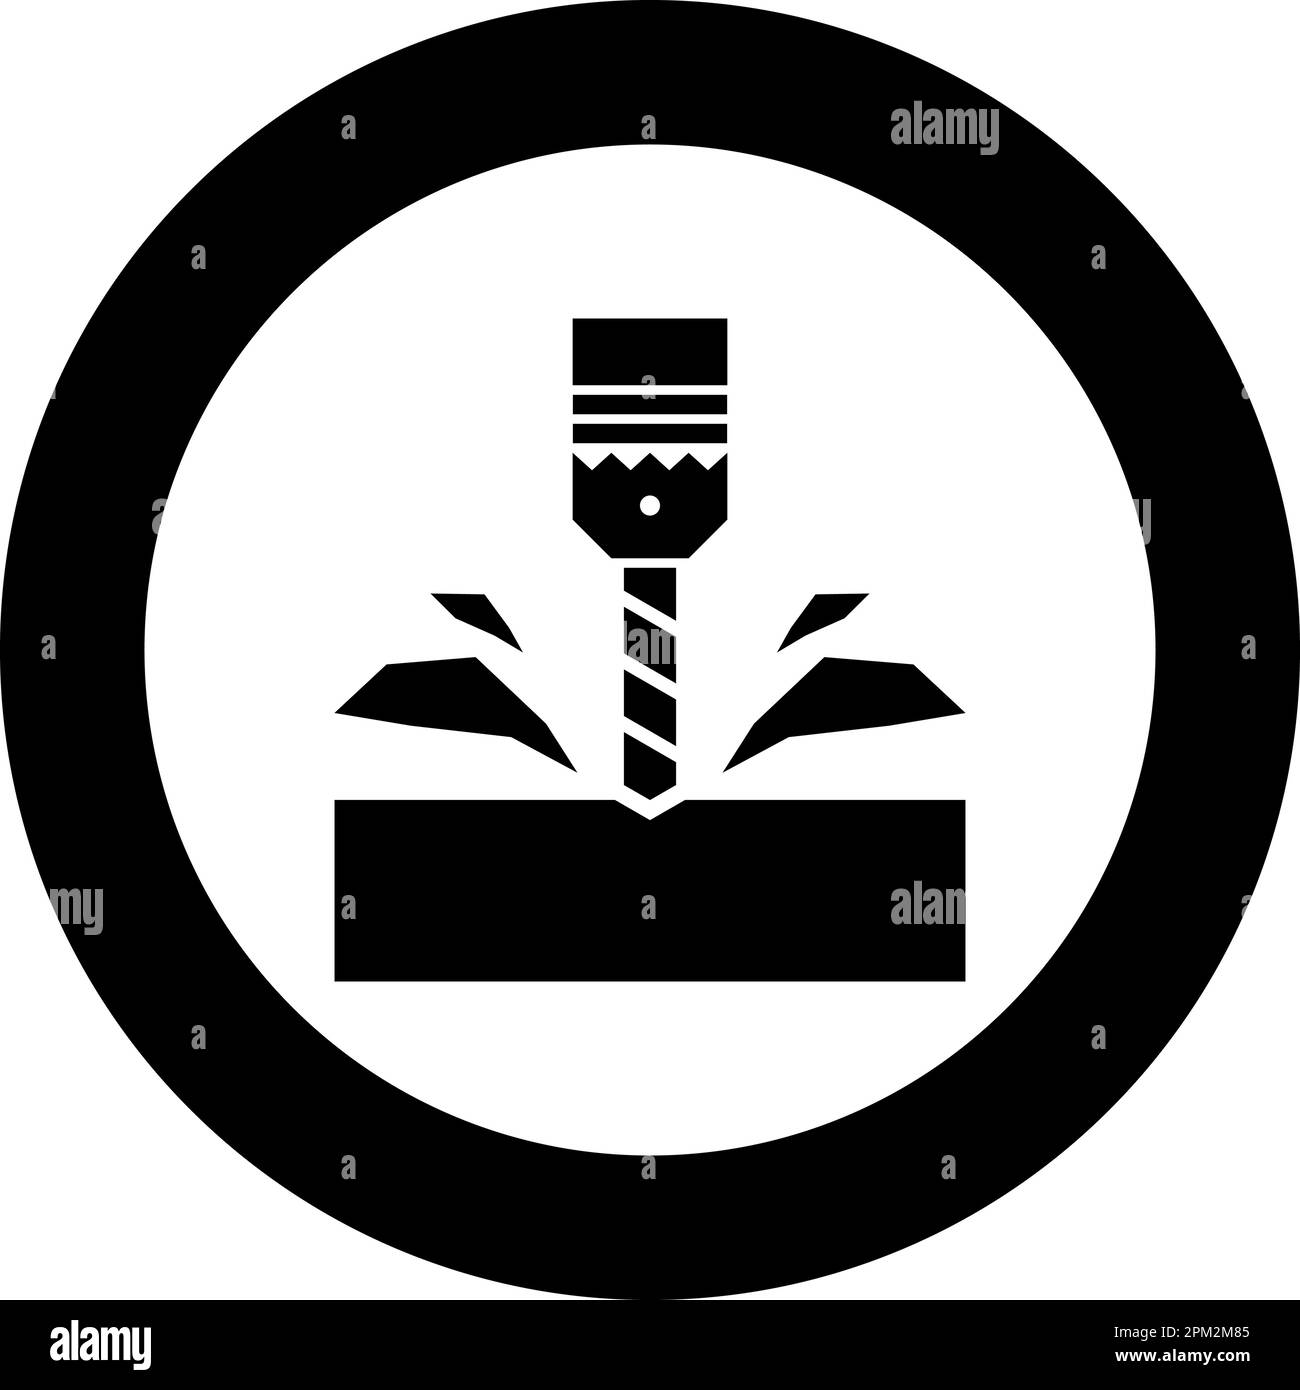 Drill with cartridge material processing shavings bit stationary use icon in circle round black color vector illustration image solid outline style Stock Vector